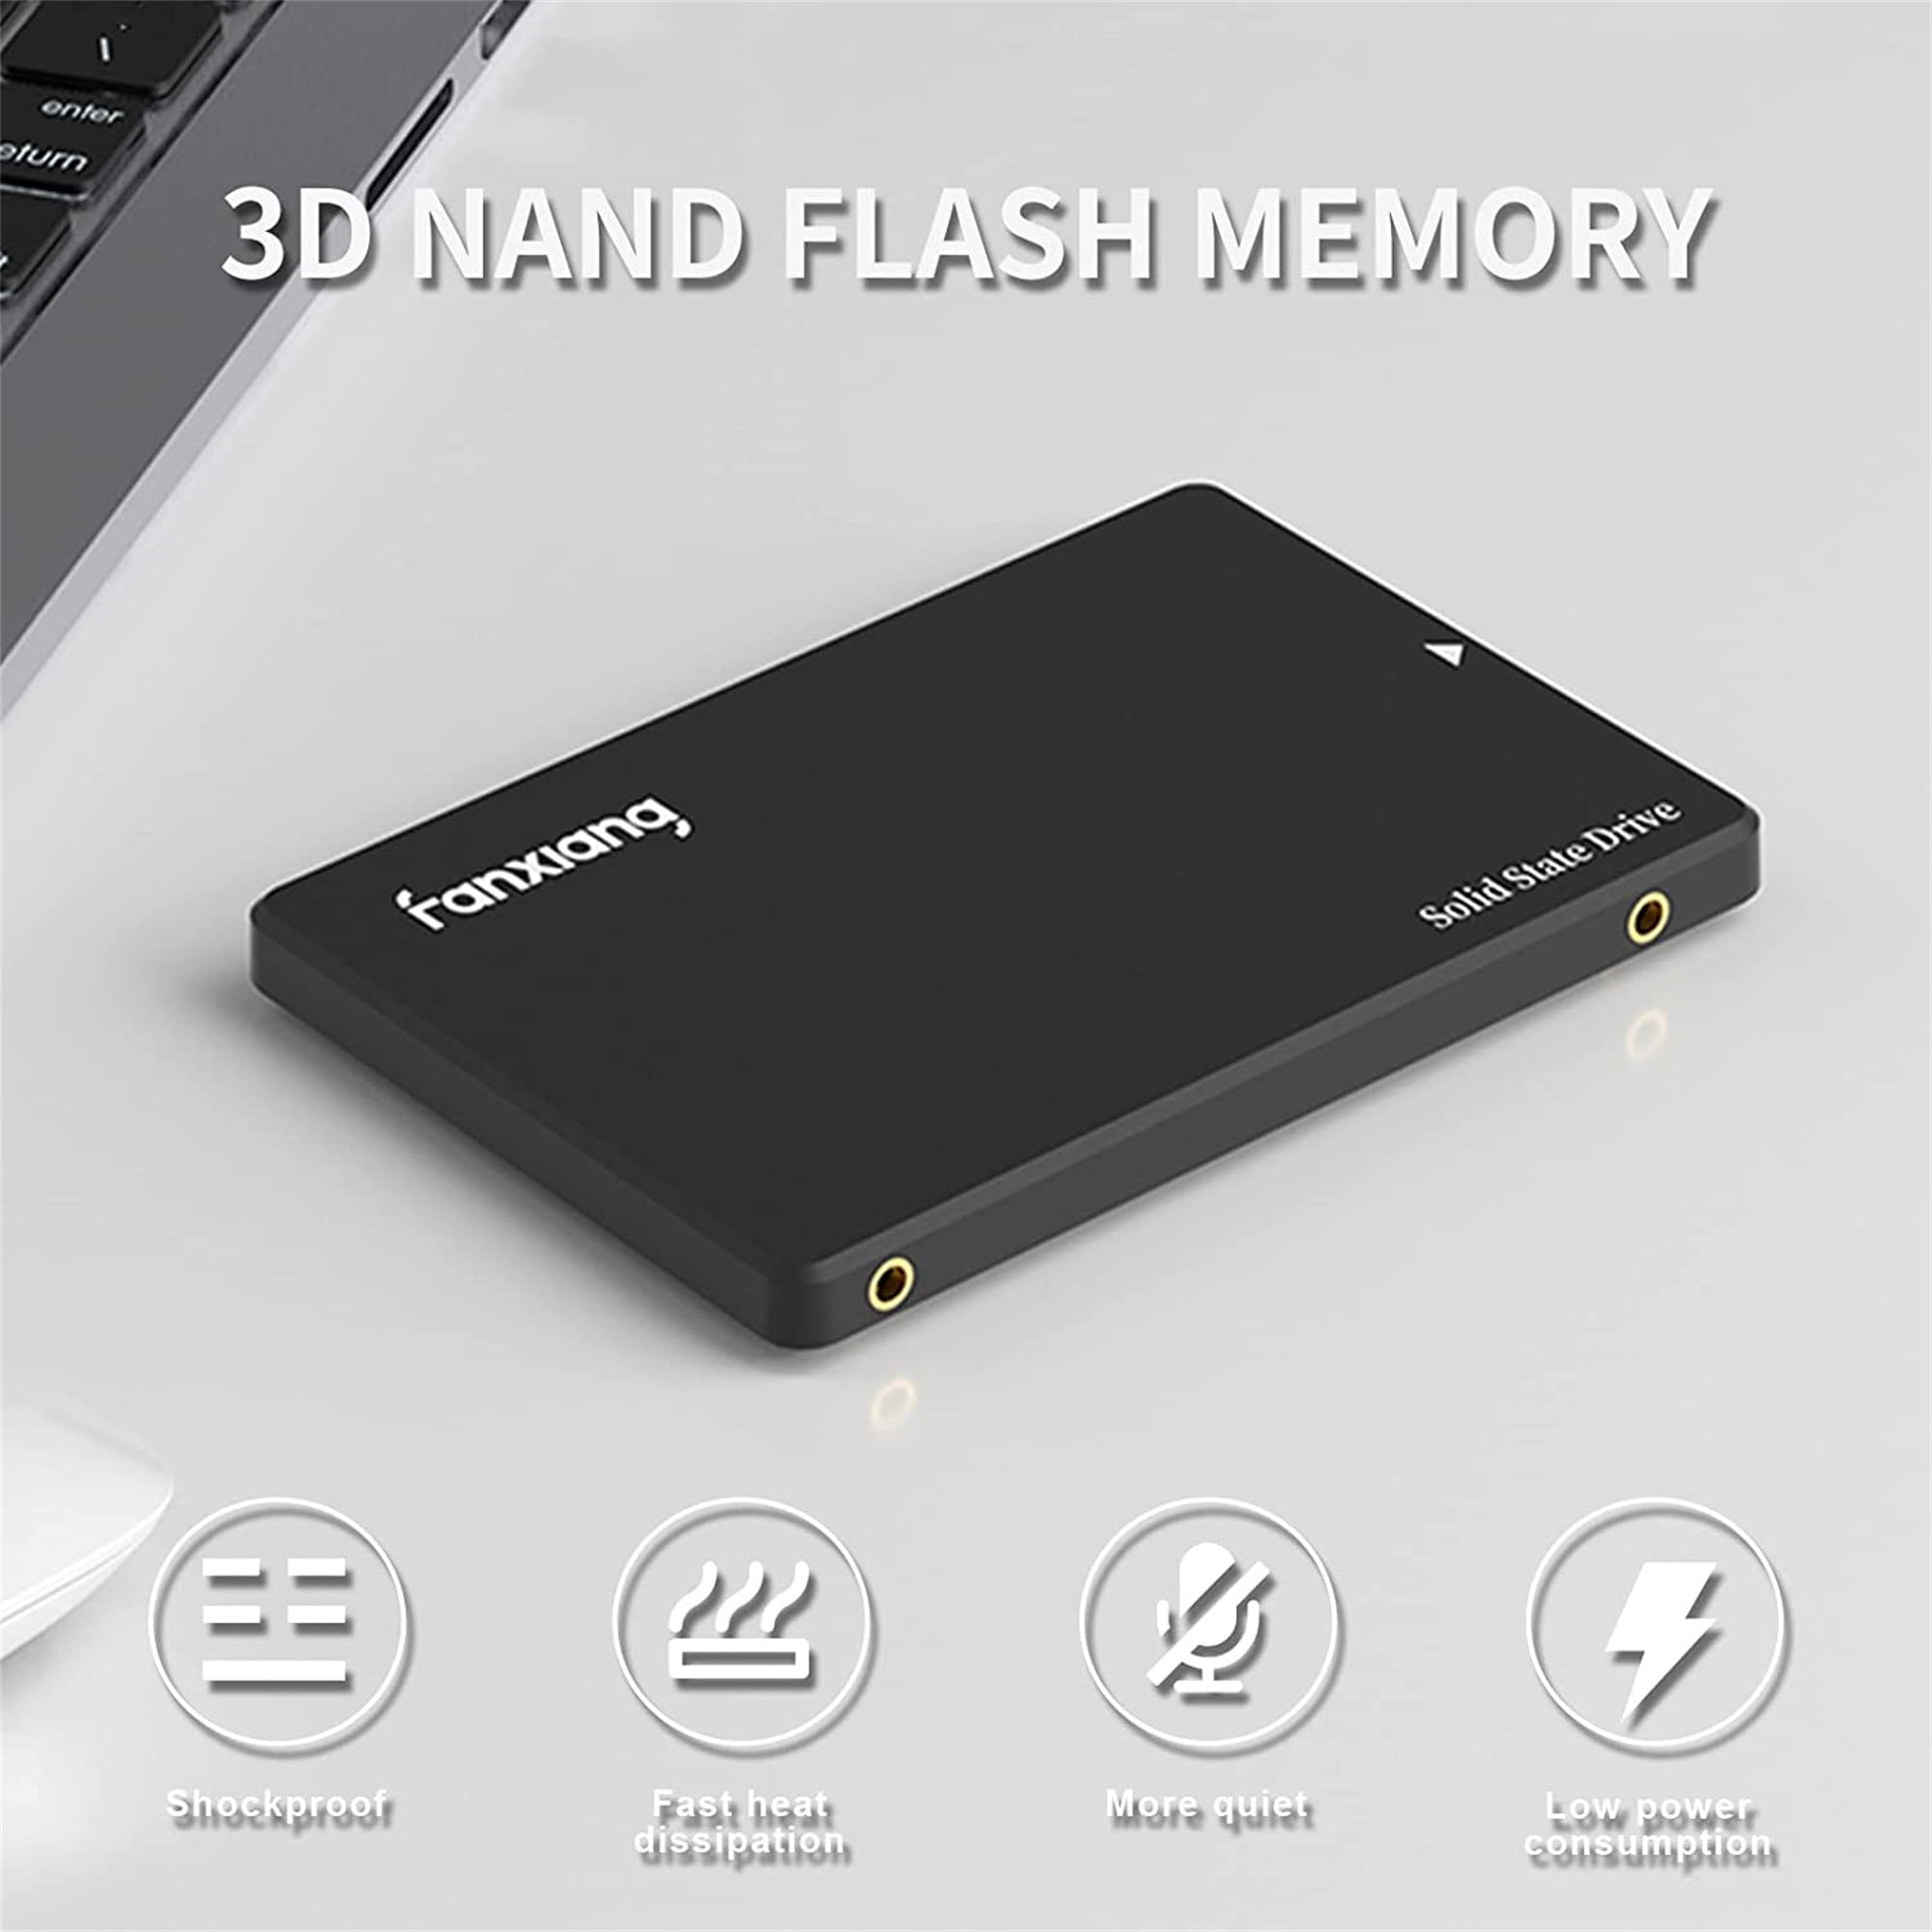 SSD interne 2.5 Fanxiang S101 - 4 To (Vendeur Tiers) –